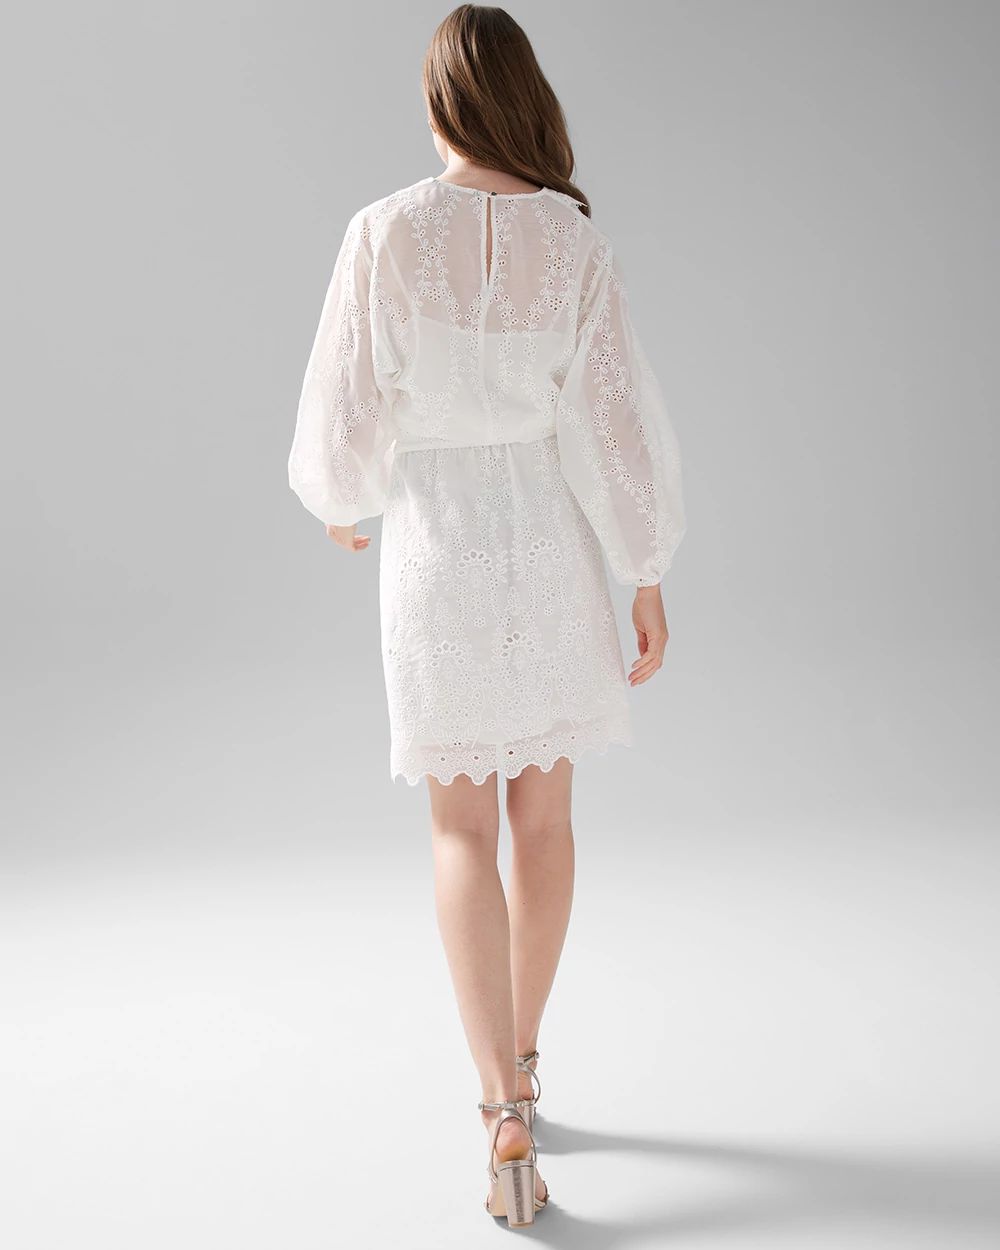 Petite Long-Sleeve White Eyelet Dress click to view larger image.